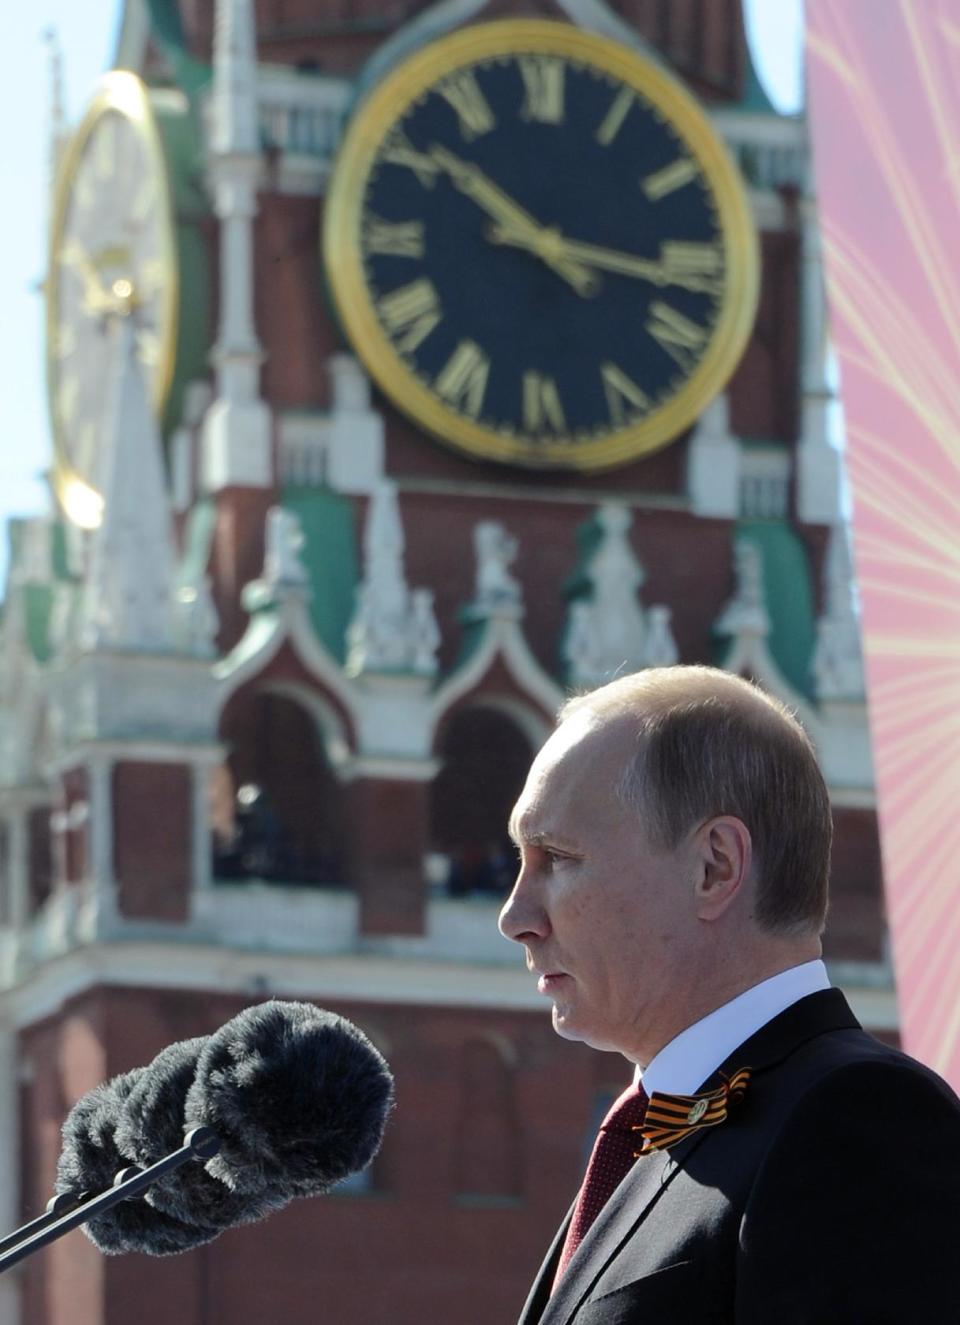 Russian President Vladimir Putin speaks during a Victory Day parade, which commemorates the 1945 defeat of Nazi Germany, at Red Square in Moscow, Russia, Friday, May 9, 2014. Putin made no reference to the situation in Ukraine when he opened Friday's parade, focusing on the historic importance of the victory over Nazi Germany. (AP Photo/RIA-Novosti, Mikhail Klimentyev, Presidential Press Service)